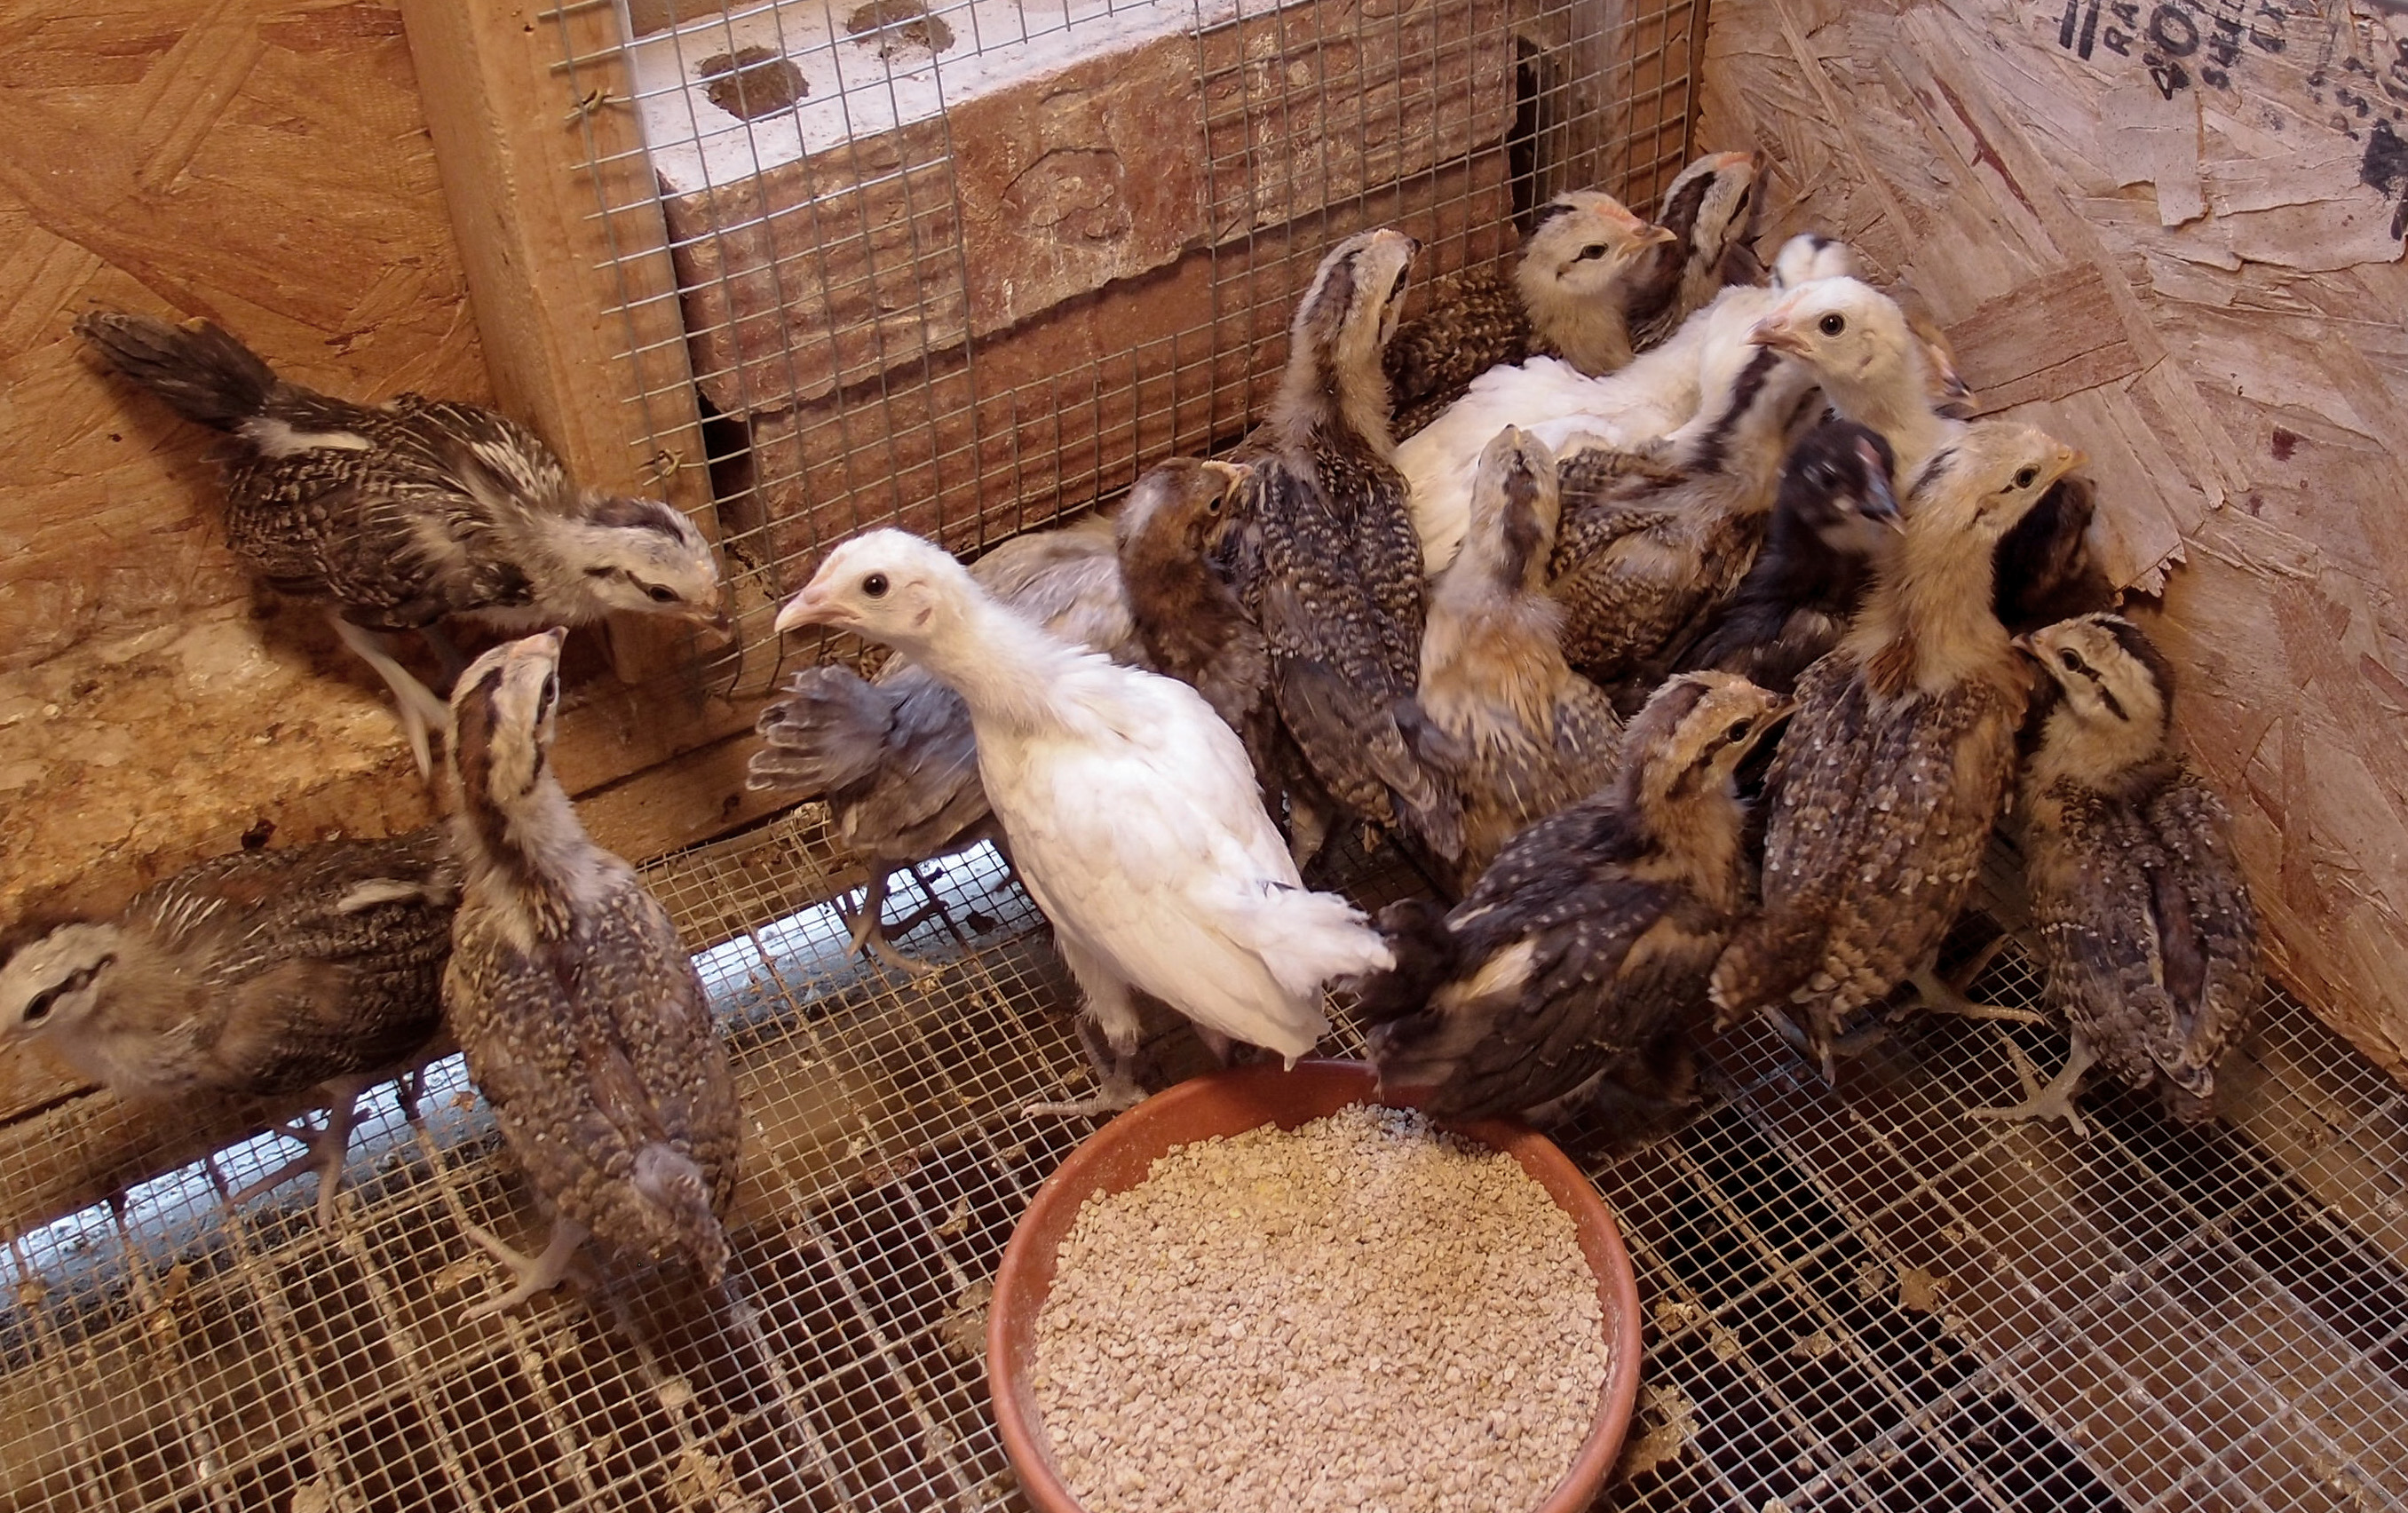 2014 BBB chicks in the brooder pen. Since our first Phoenix flock originated with chicks from Aubrey, we added some more this year from the same source.